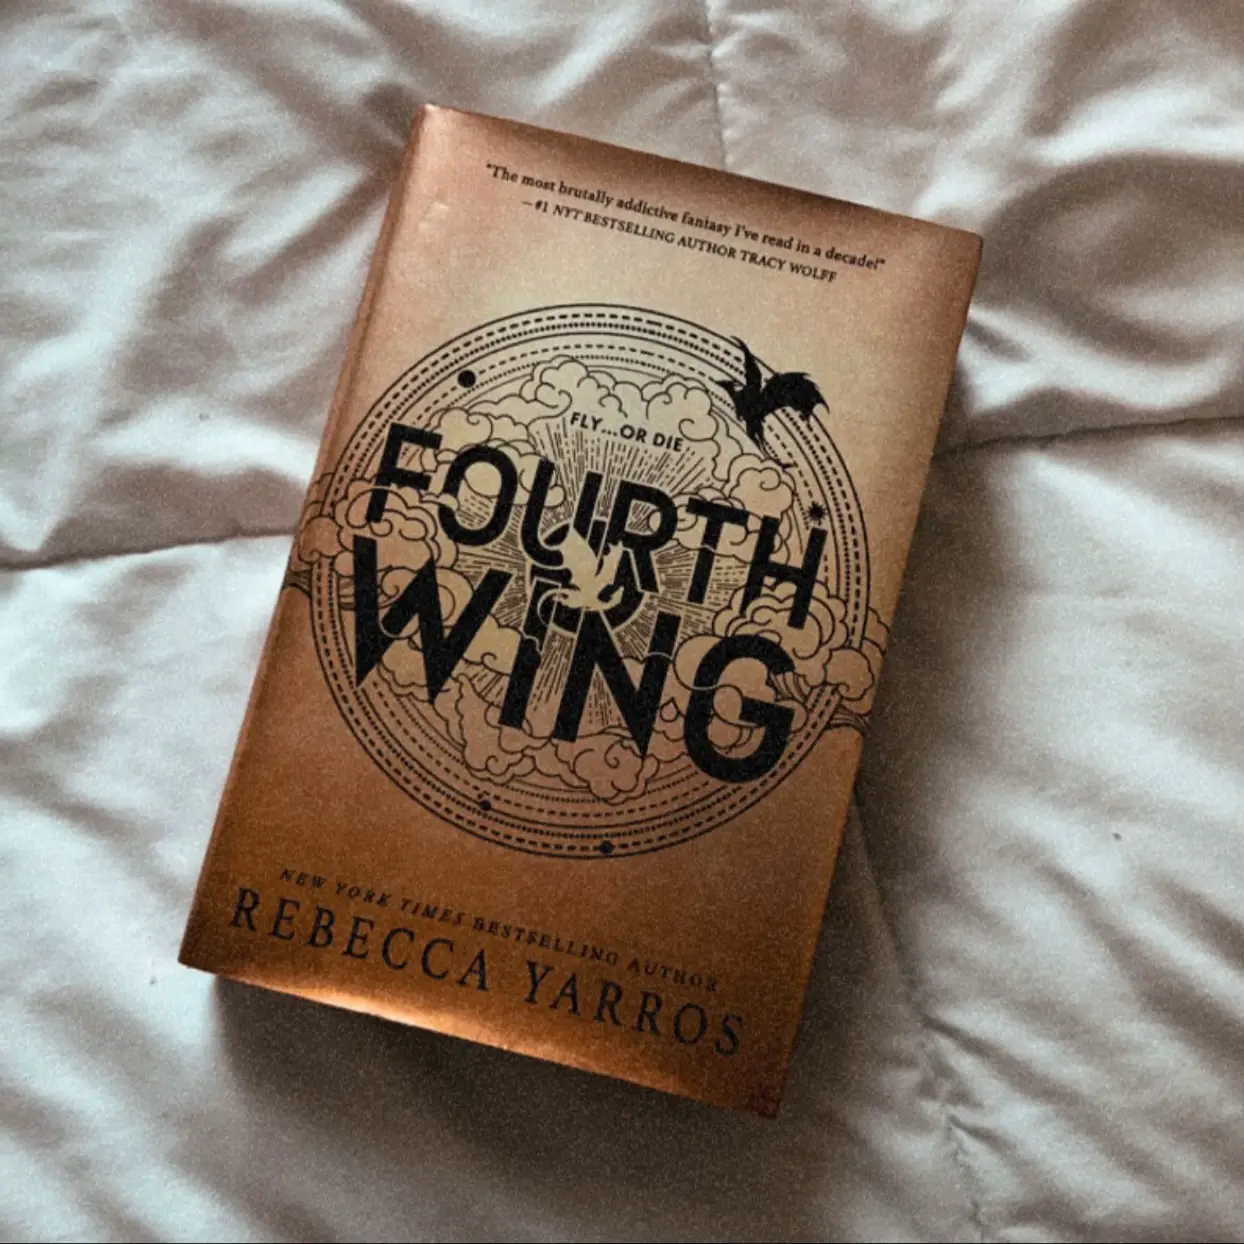 Book Annotation Guide for Fourth Wing by Rebecca Yarros - Fable